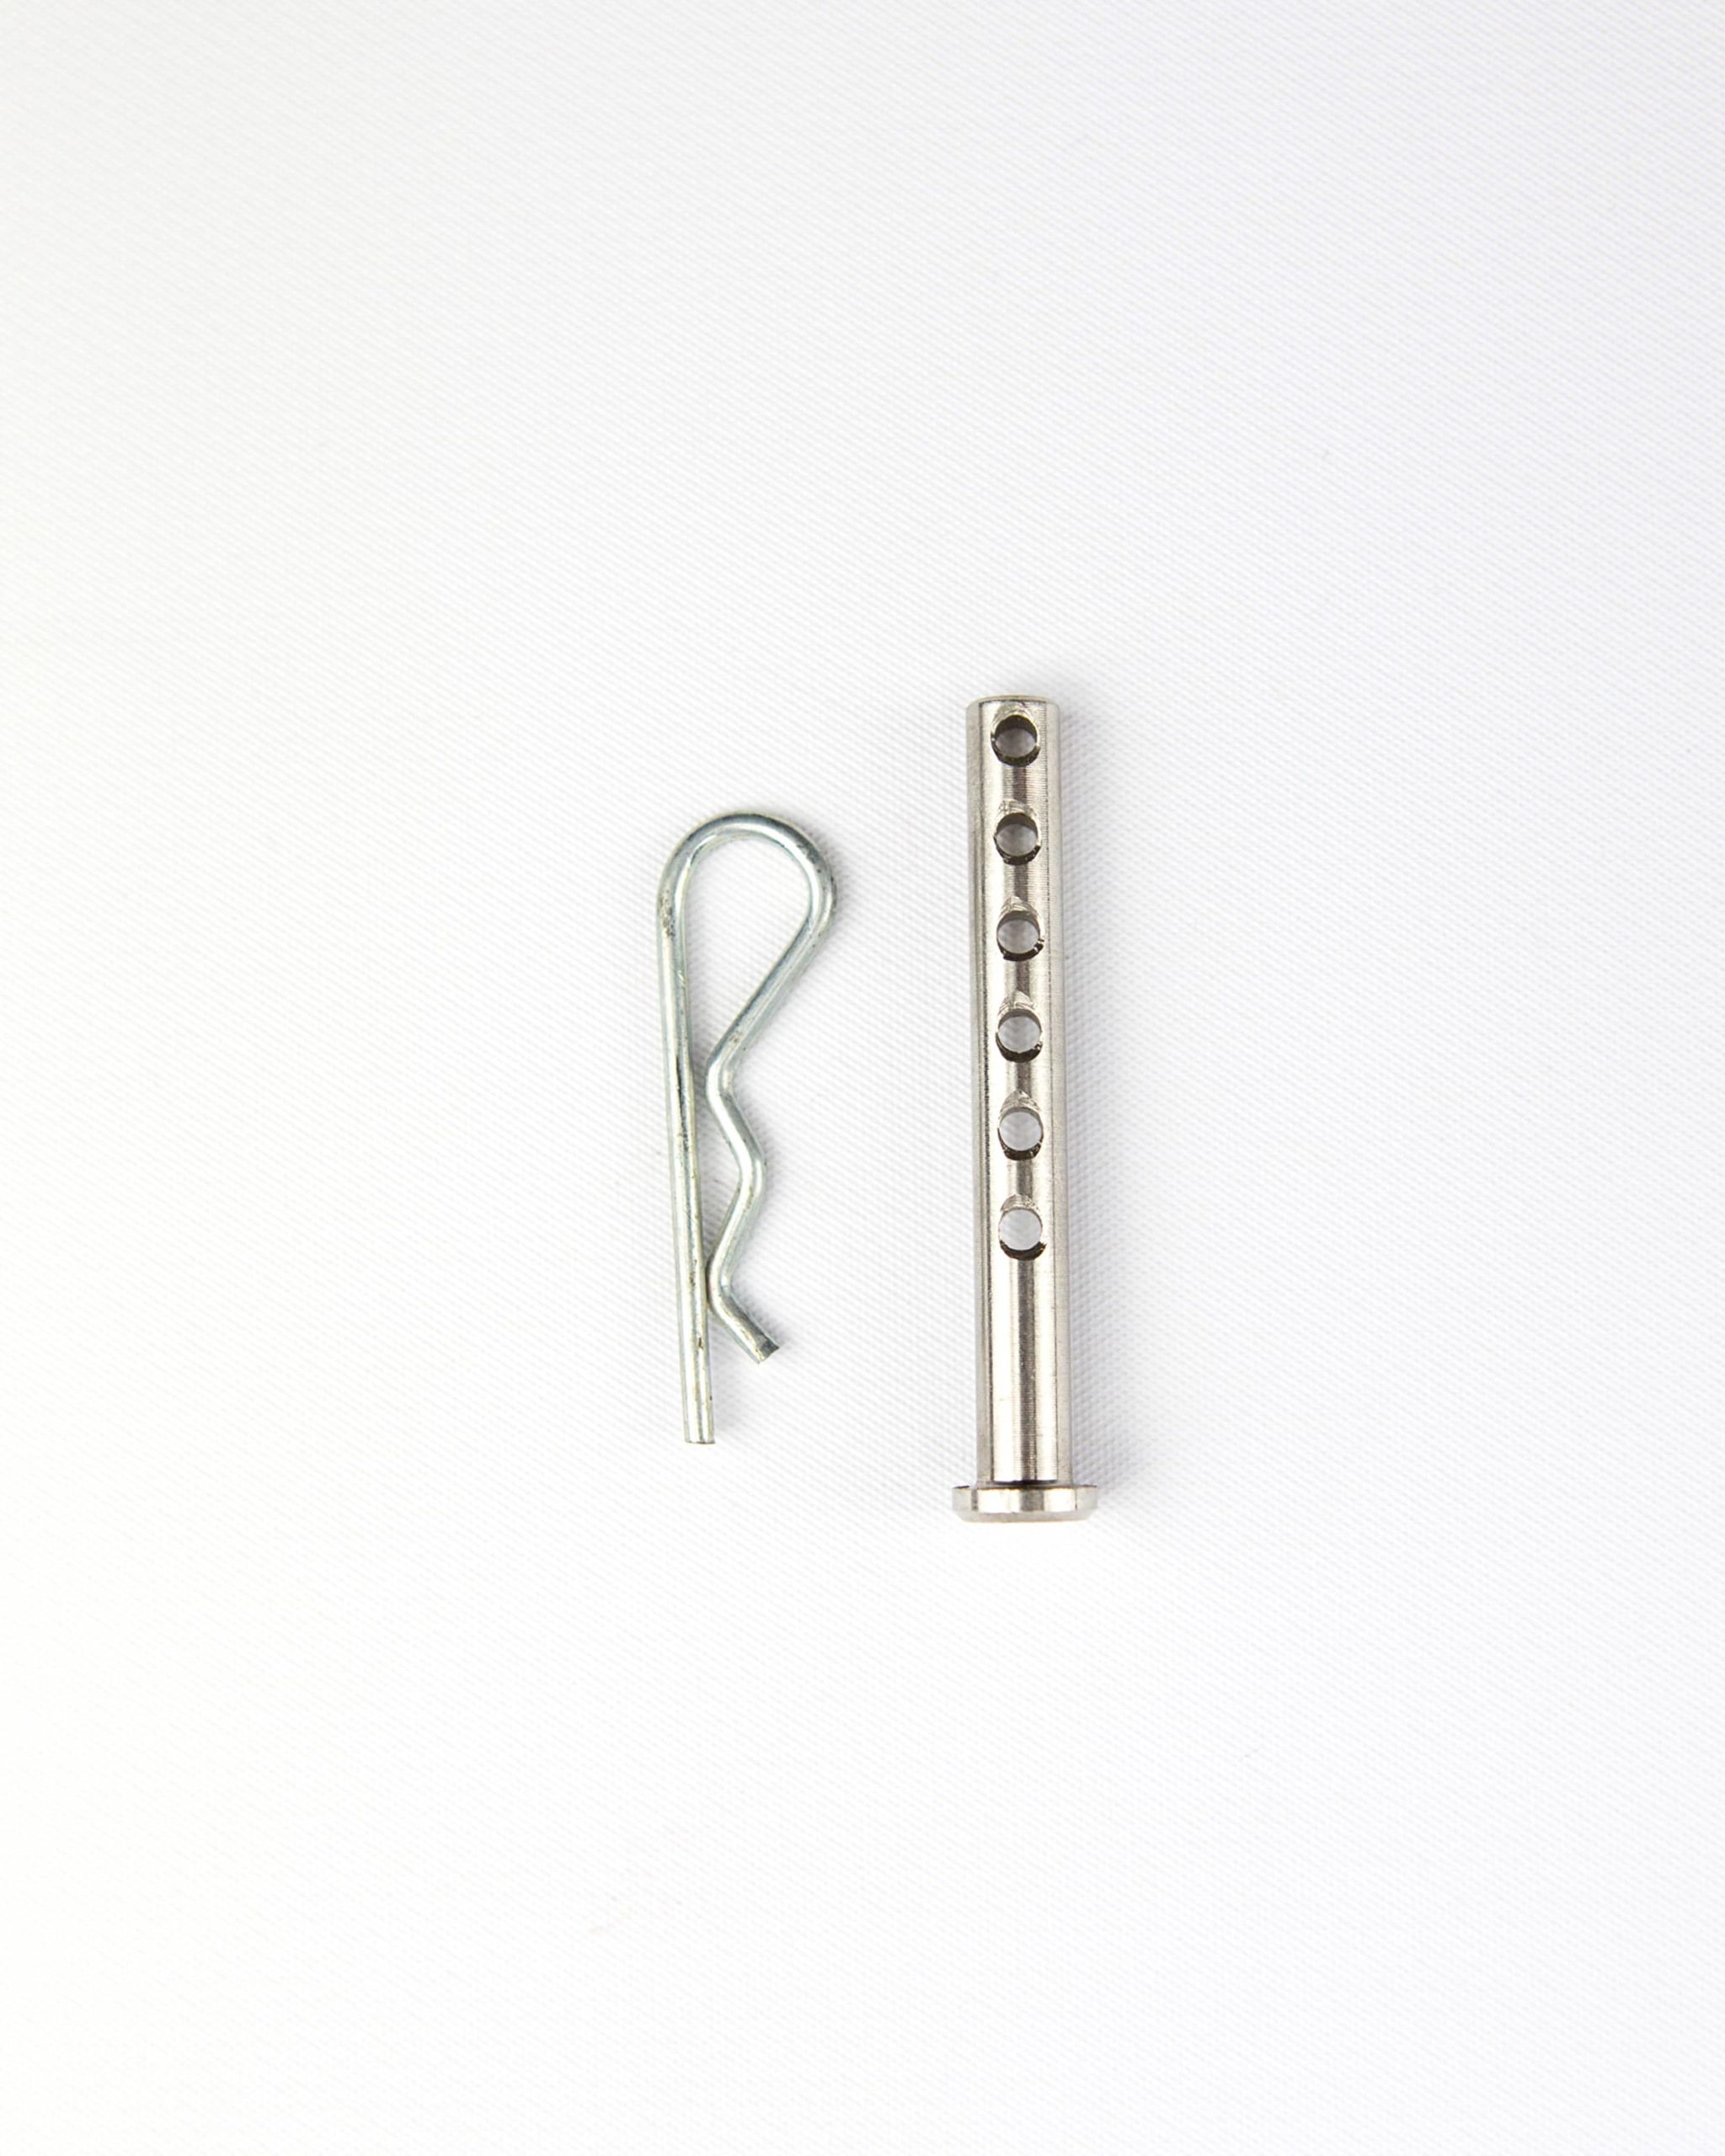 Clevis Spring Pins, Clips and Cotters Clips for 3/8 Clevis Pins